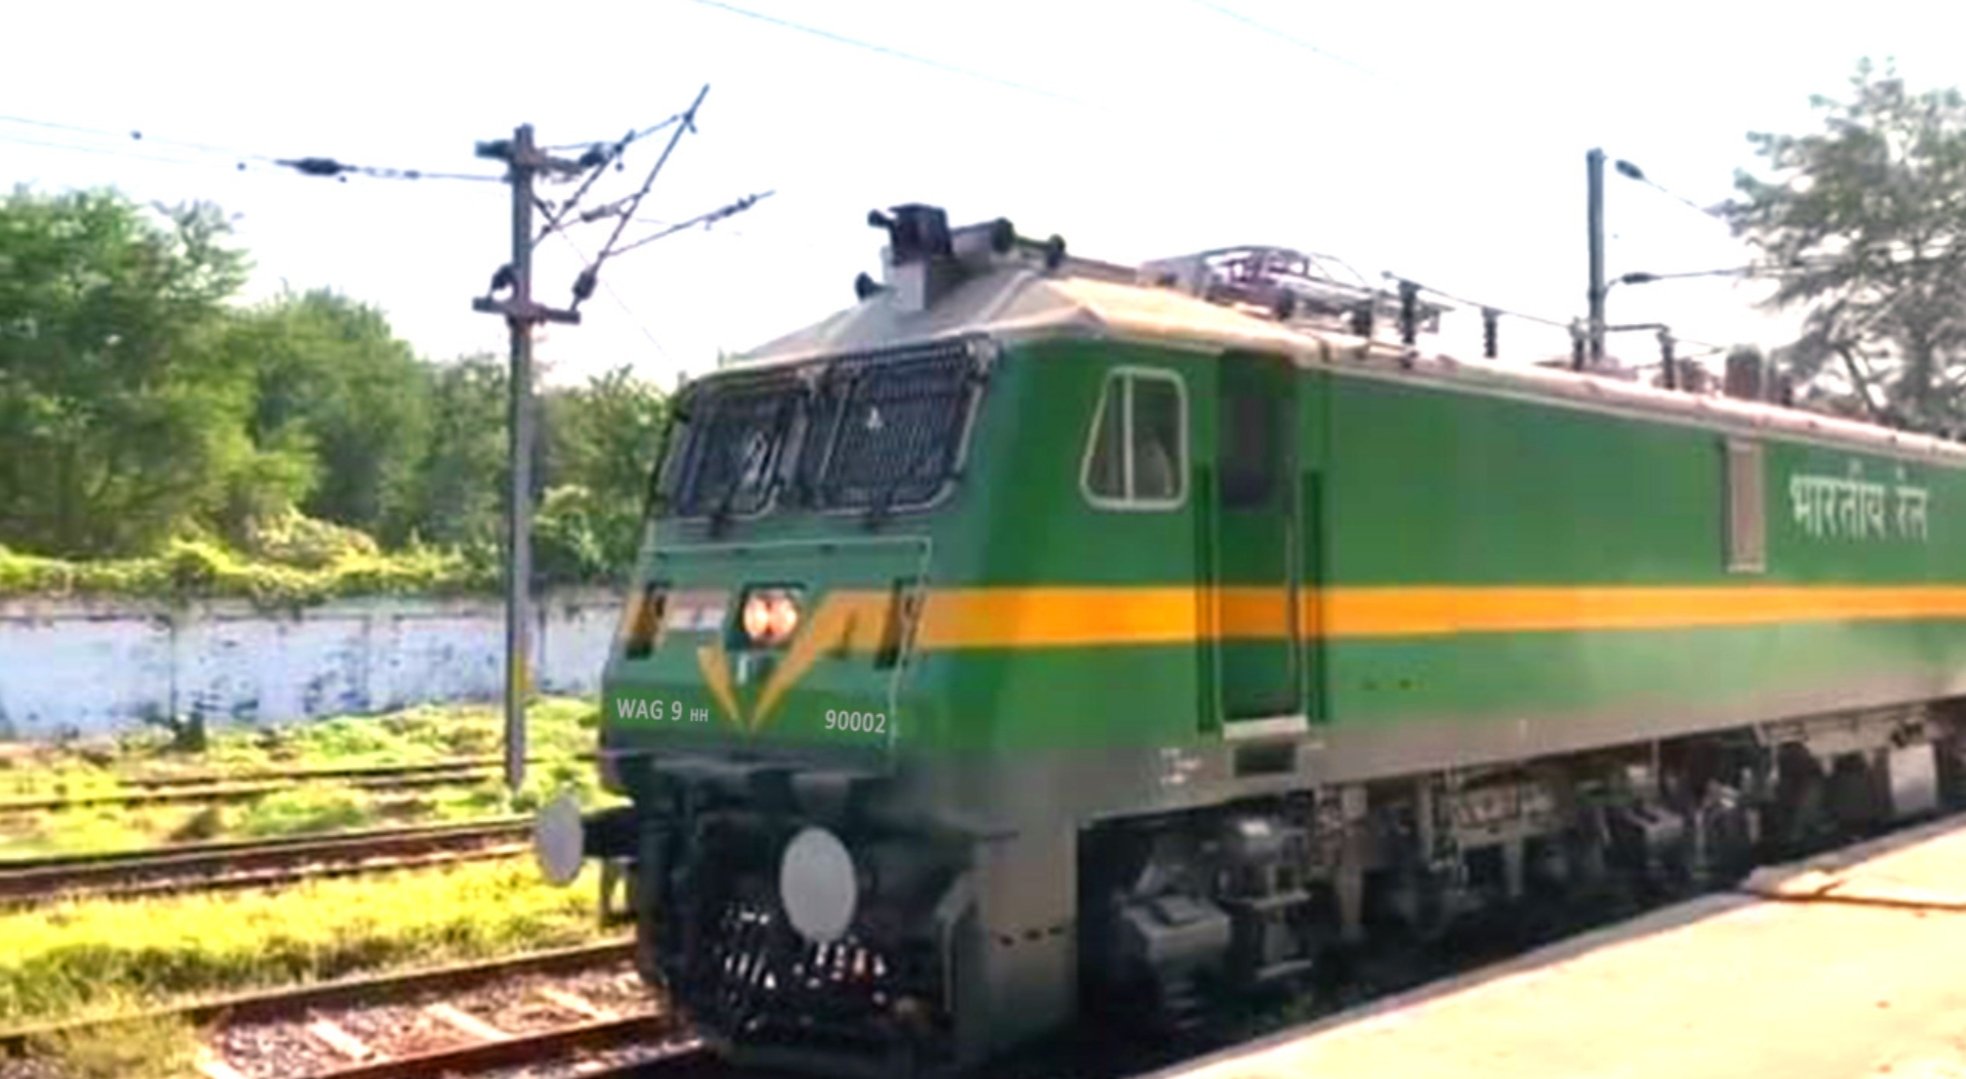 Clw Ir S First 9000 Hp Wag 9 Hh Loco No Developed By Clw Has Been Successfully Commissioned At Tata Shed The Loco Has Been Put In Service On 26 12 tmanirbharbharat T Co 3px8p9dwen